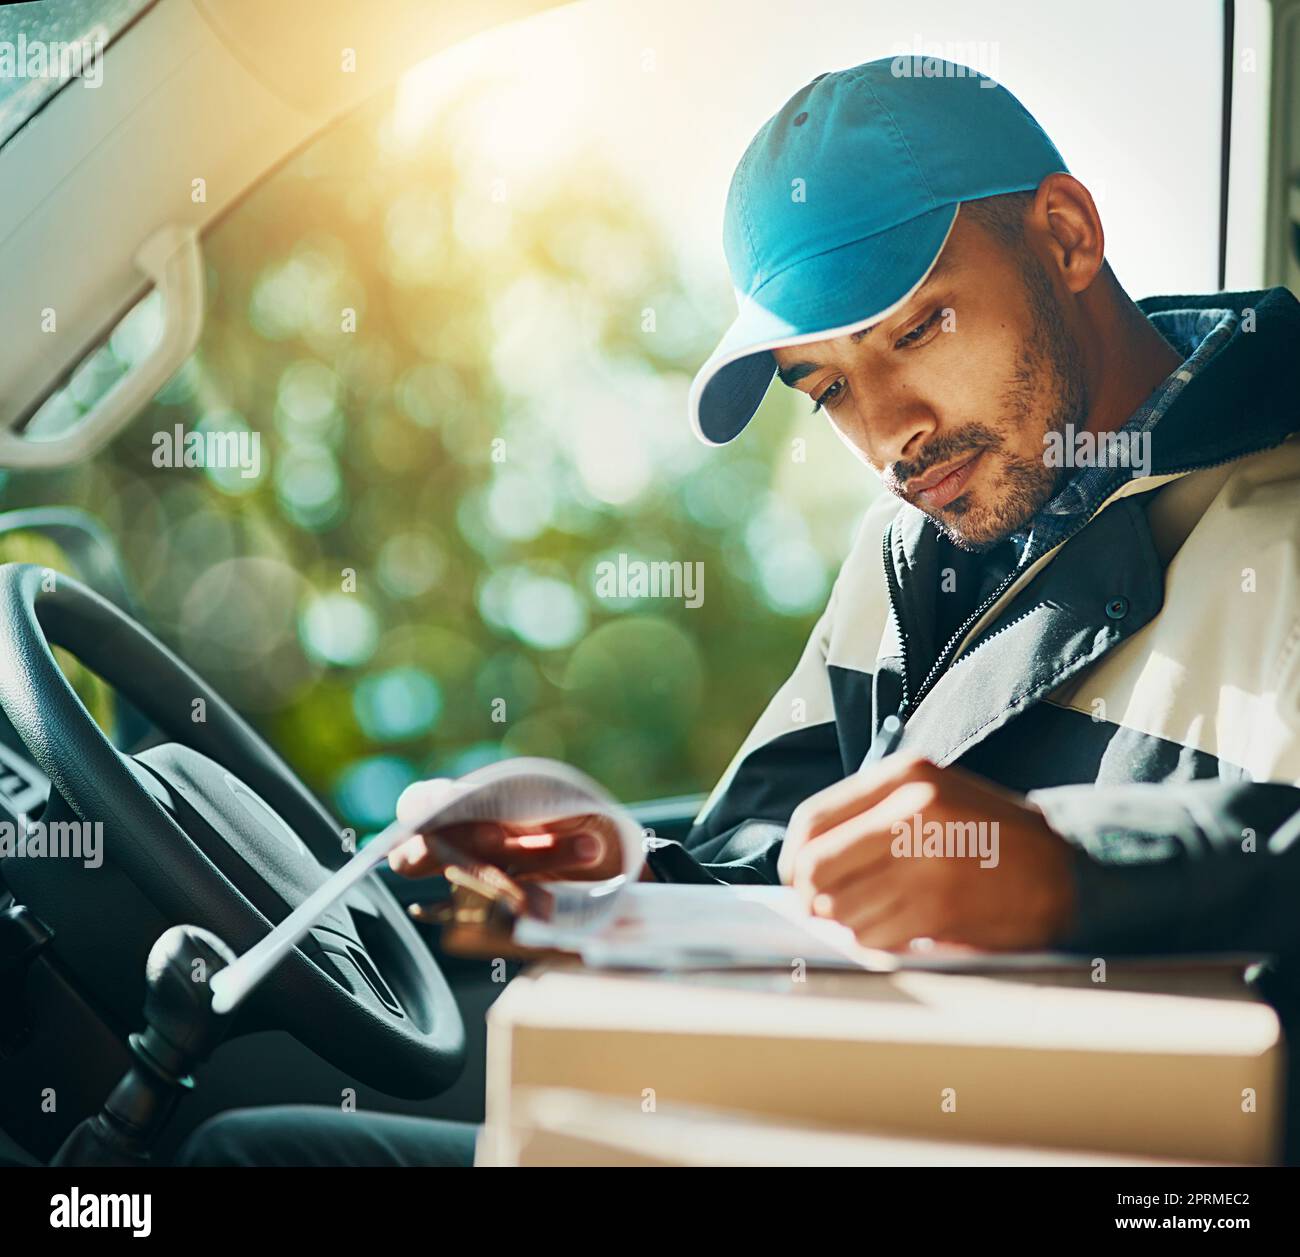 Where to with the next delivery. a courier making deliveries in his van. Stock Photo